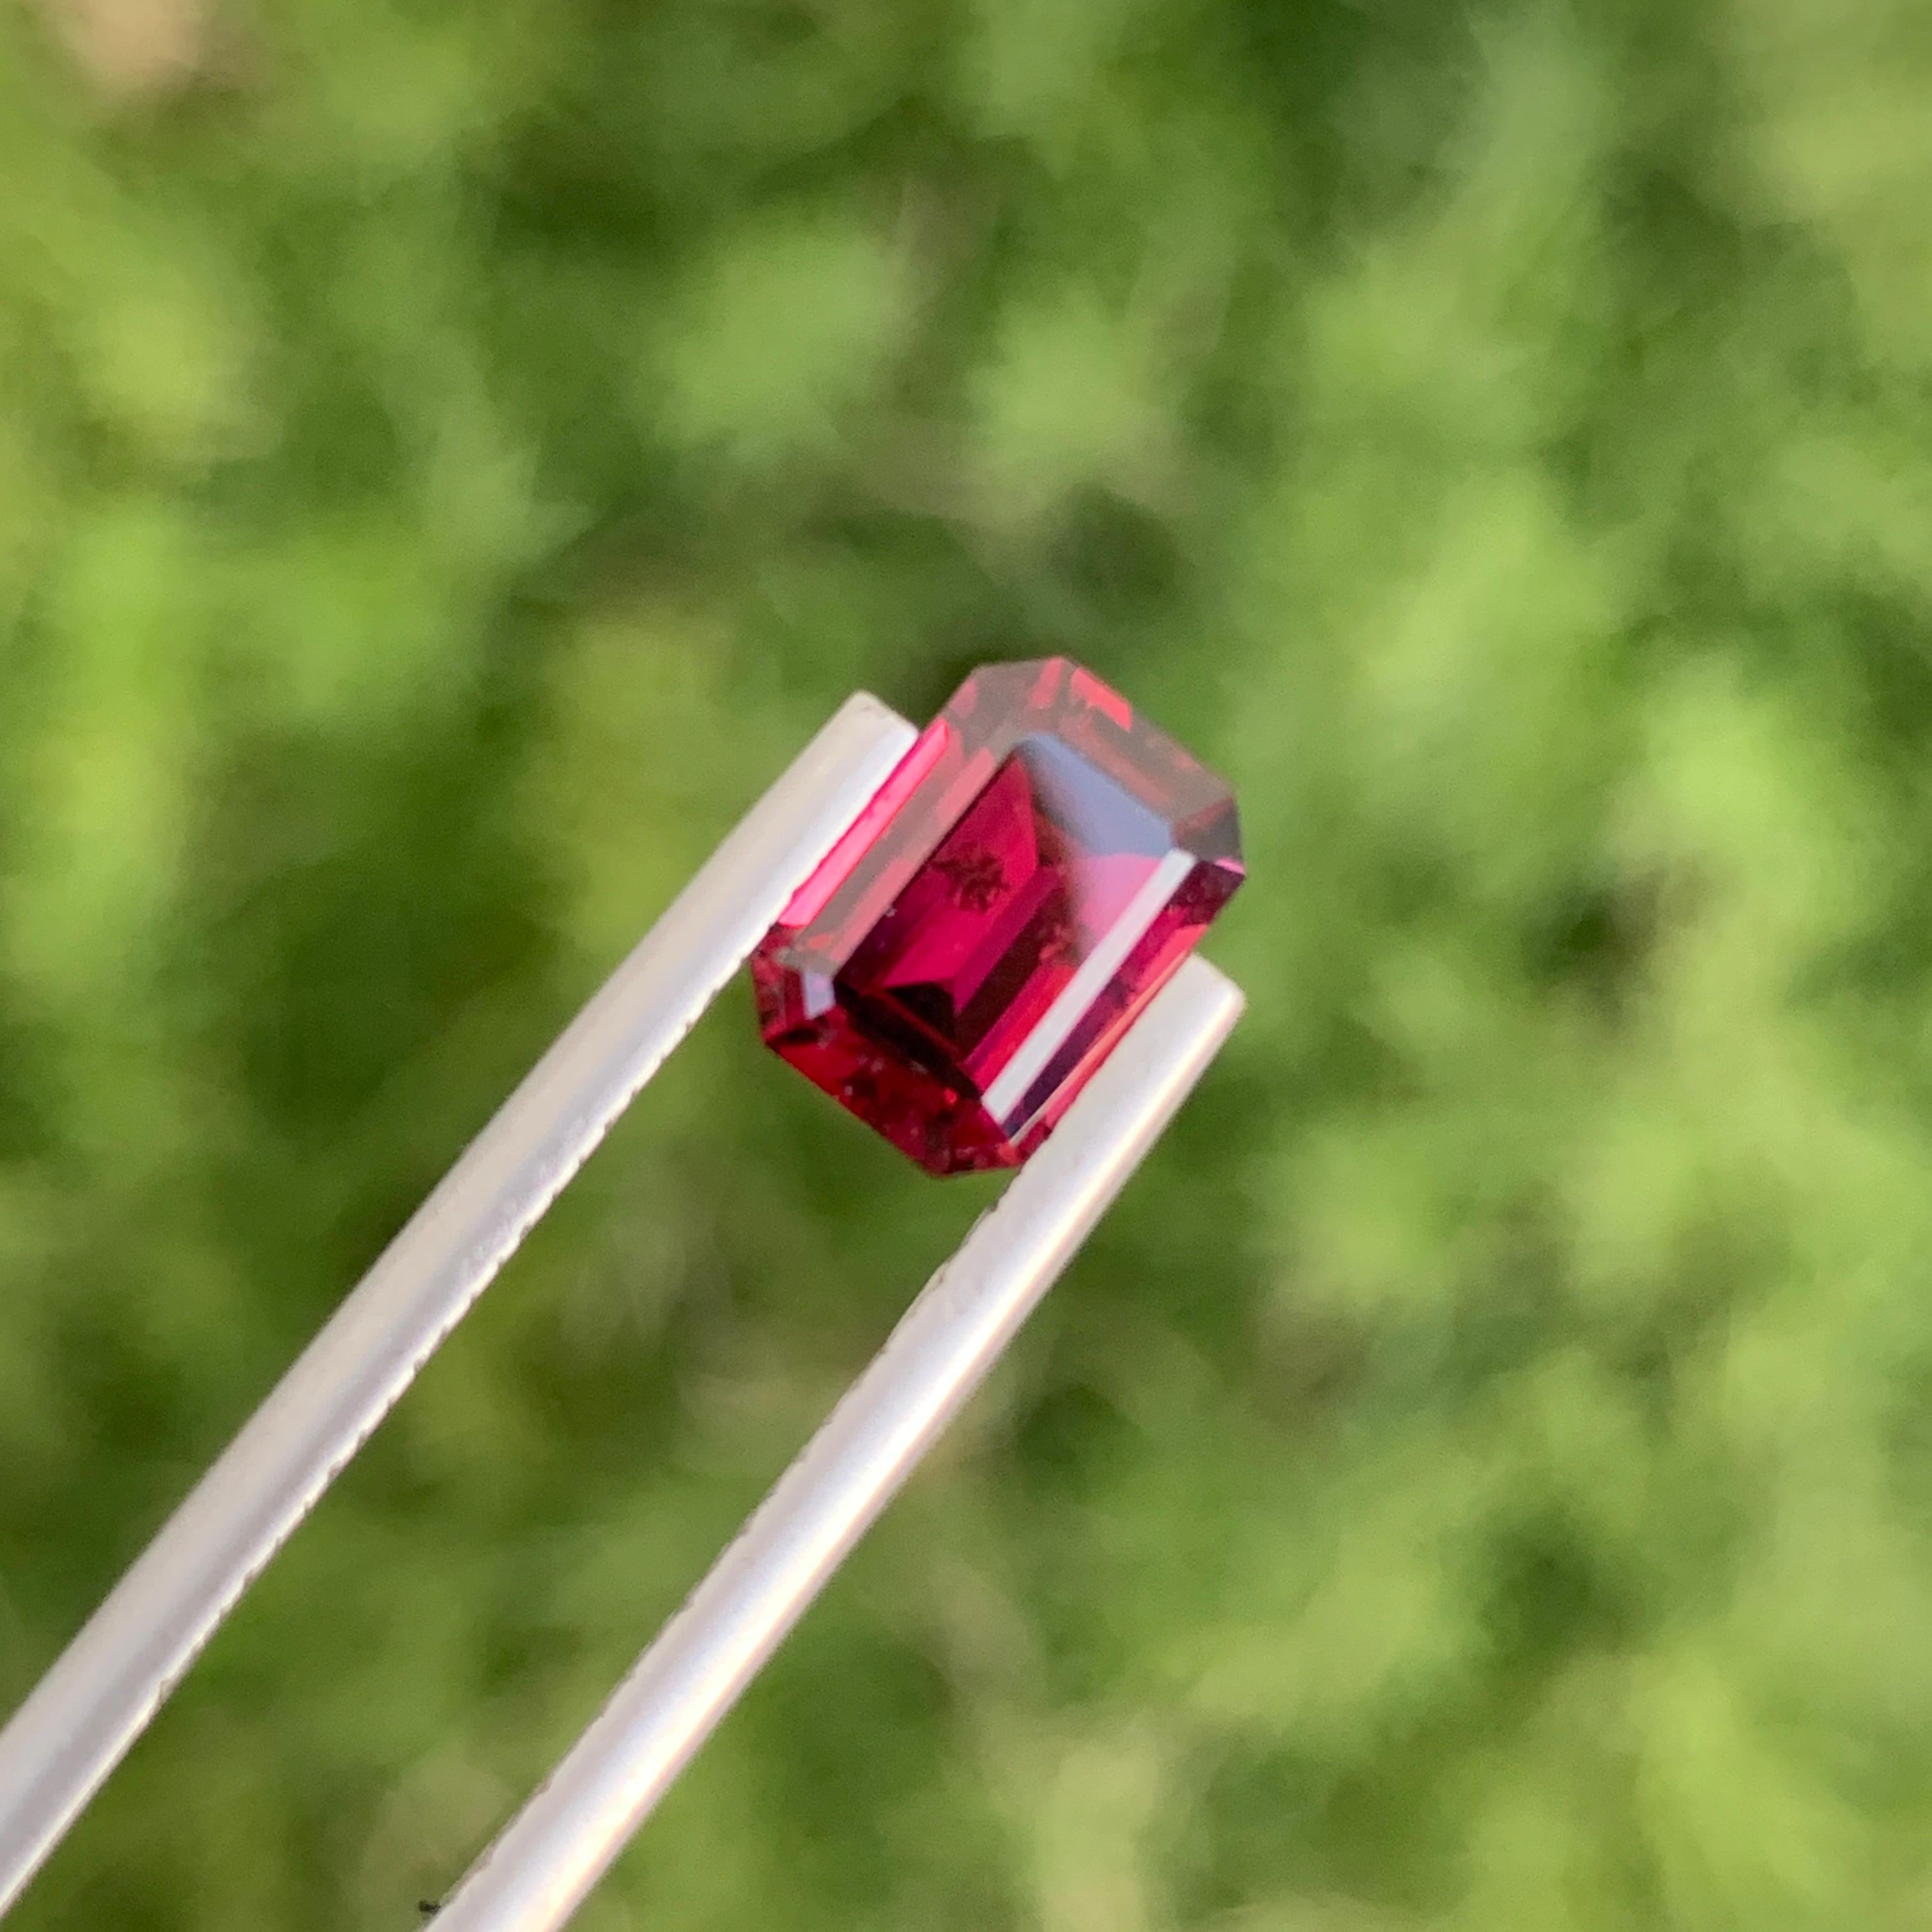 Loose Rhodolite Garnet
Weight: 2.35 Carats
Dimension: 8.5 x 5.9 x 4.3 Mm
Origin: Central African Republic
Colour: Red
Treatment: Non
Certificate: On Demand

Rhodolite garnet, a gemstone celebrated for its enchanting reddish-purple hues, occupies a